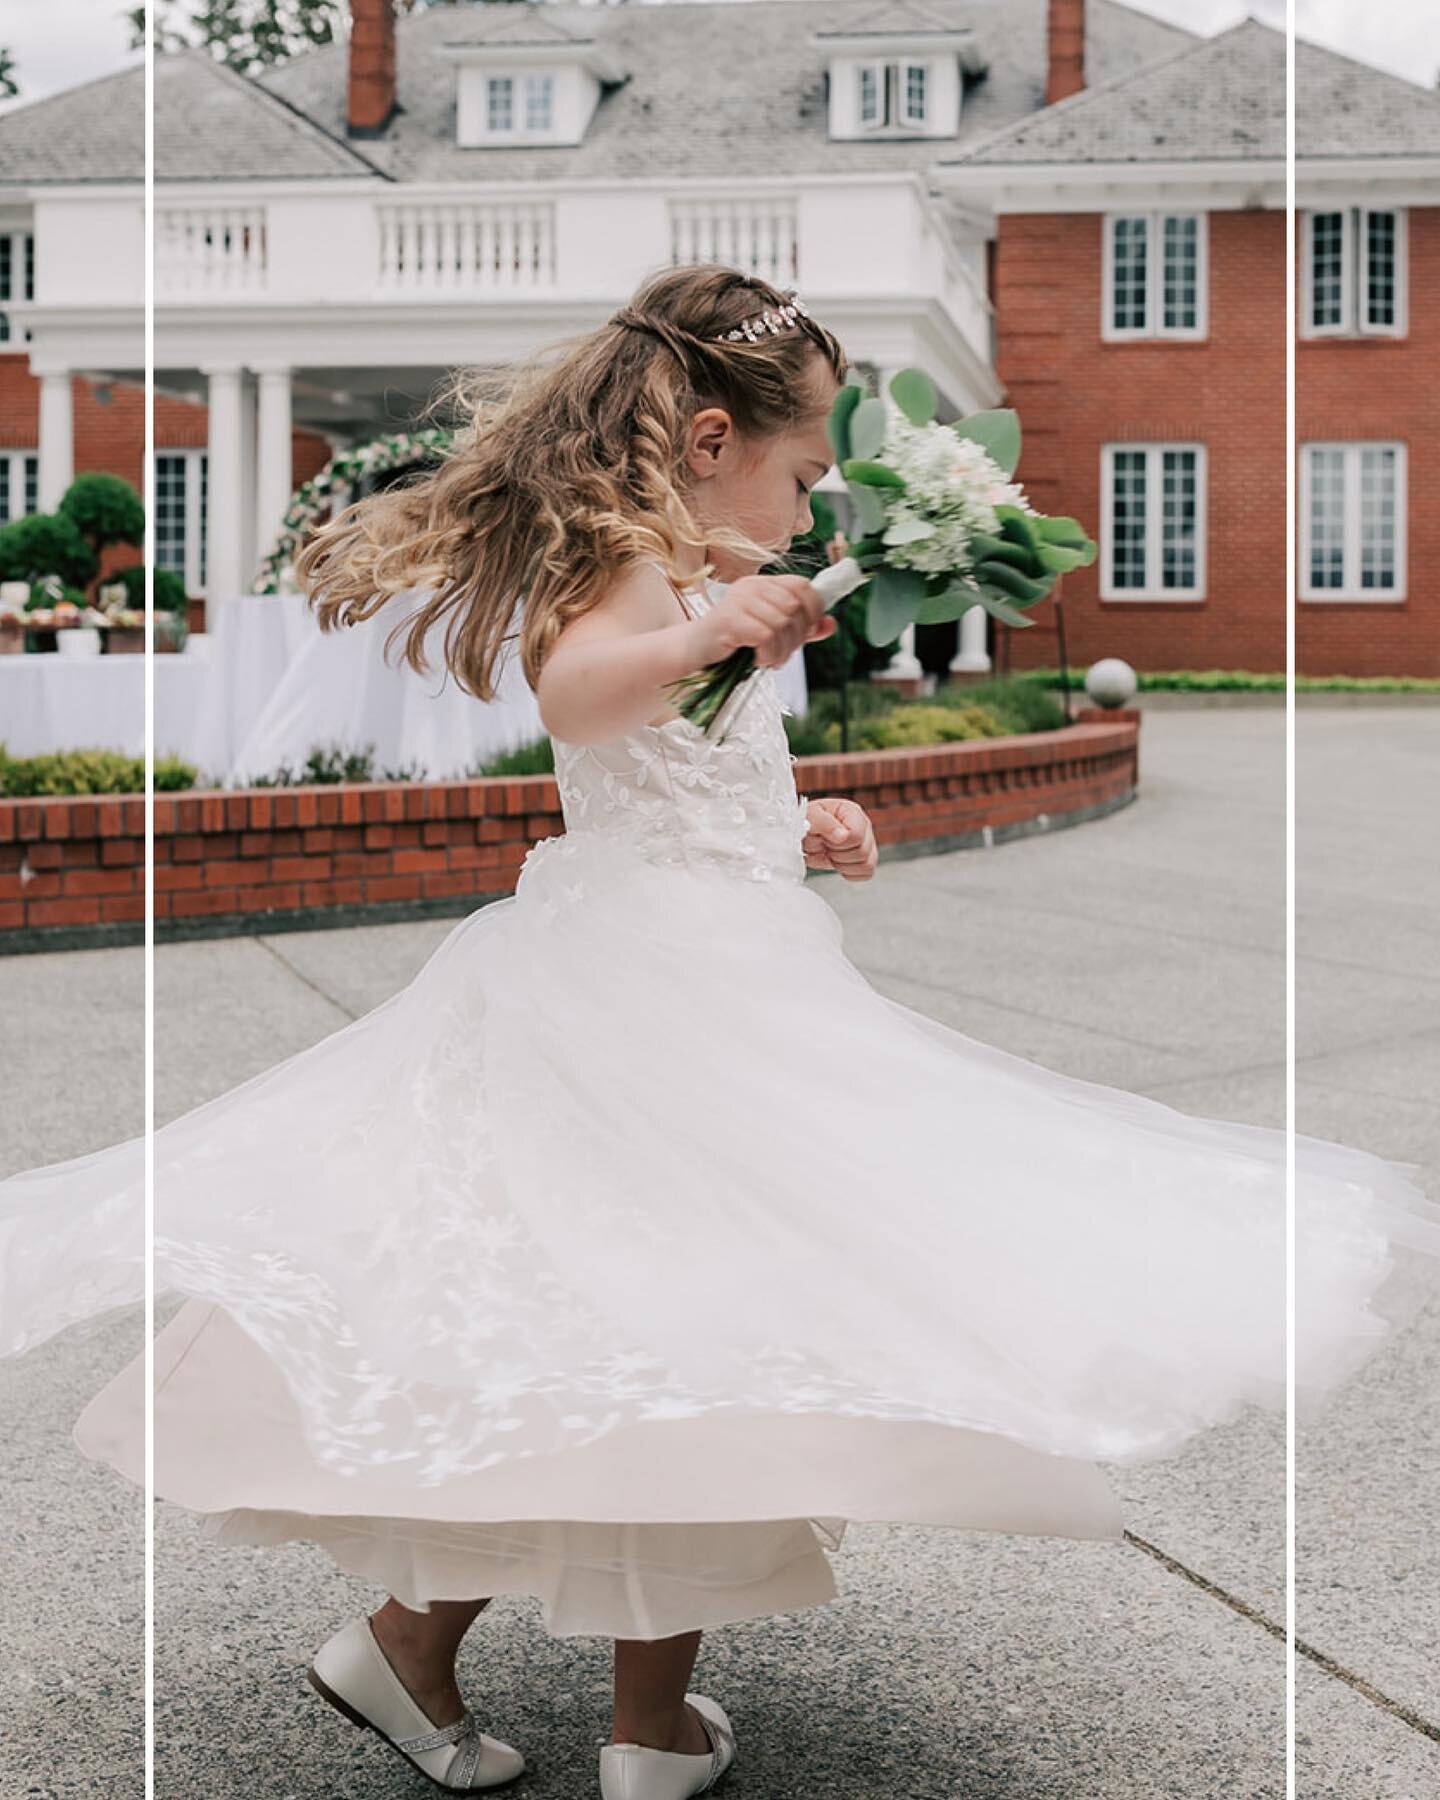 Happy Friday!
We hope your weekend brings you as much joy as J&rsquo;s flower girl 🌸 

What are your plans for the weekend? Let us know in the comments below! 

If your looking for a last minute venue for 2022 dm us we have limited spots available 
